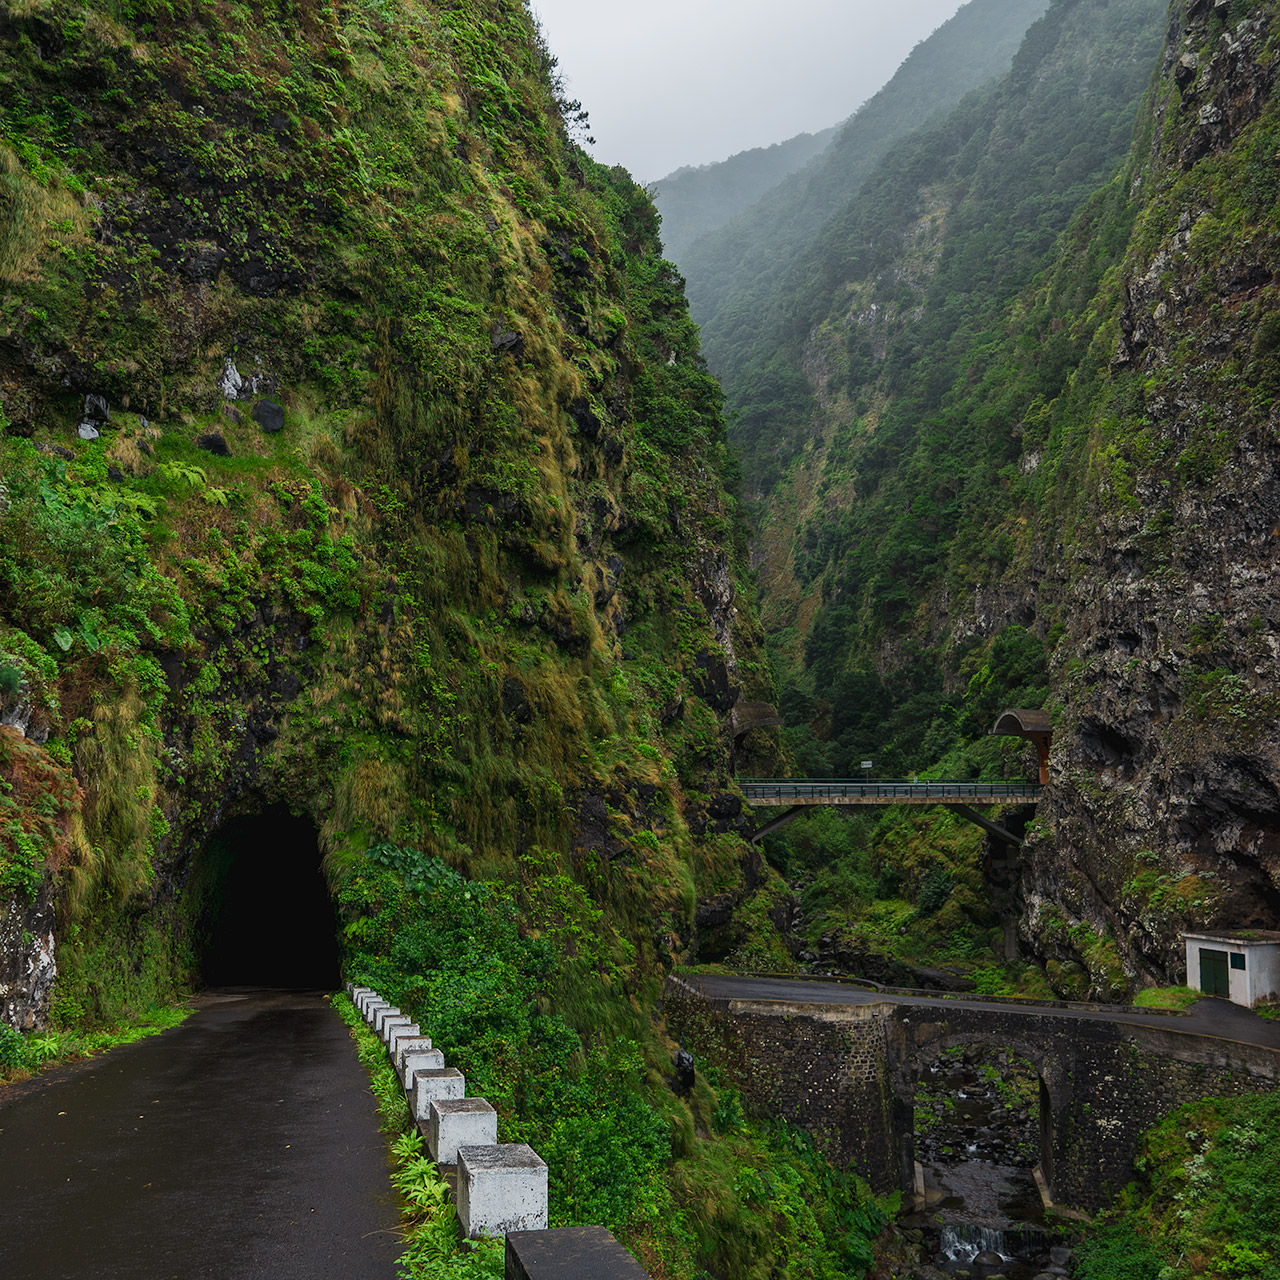 The old road and two-way tunnel on the North coast of Madeira. Some of the older roads are in a very bad state and closed, but this one was open for traffic.